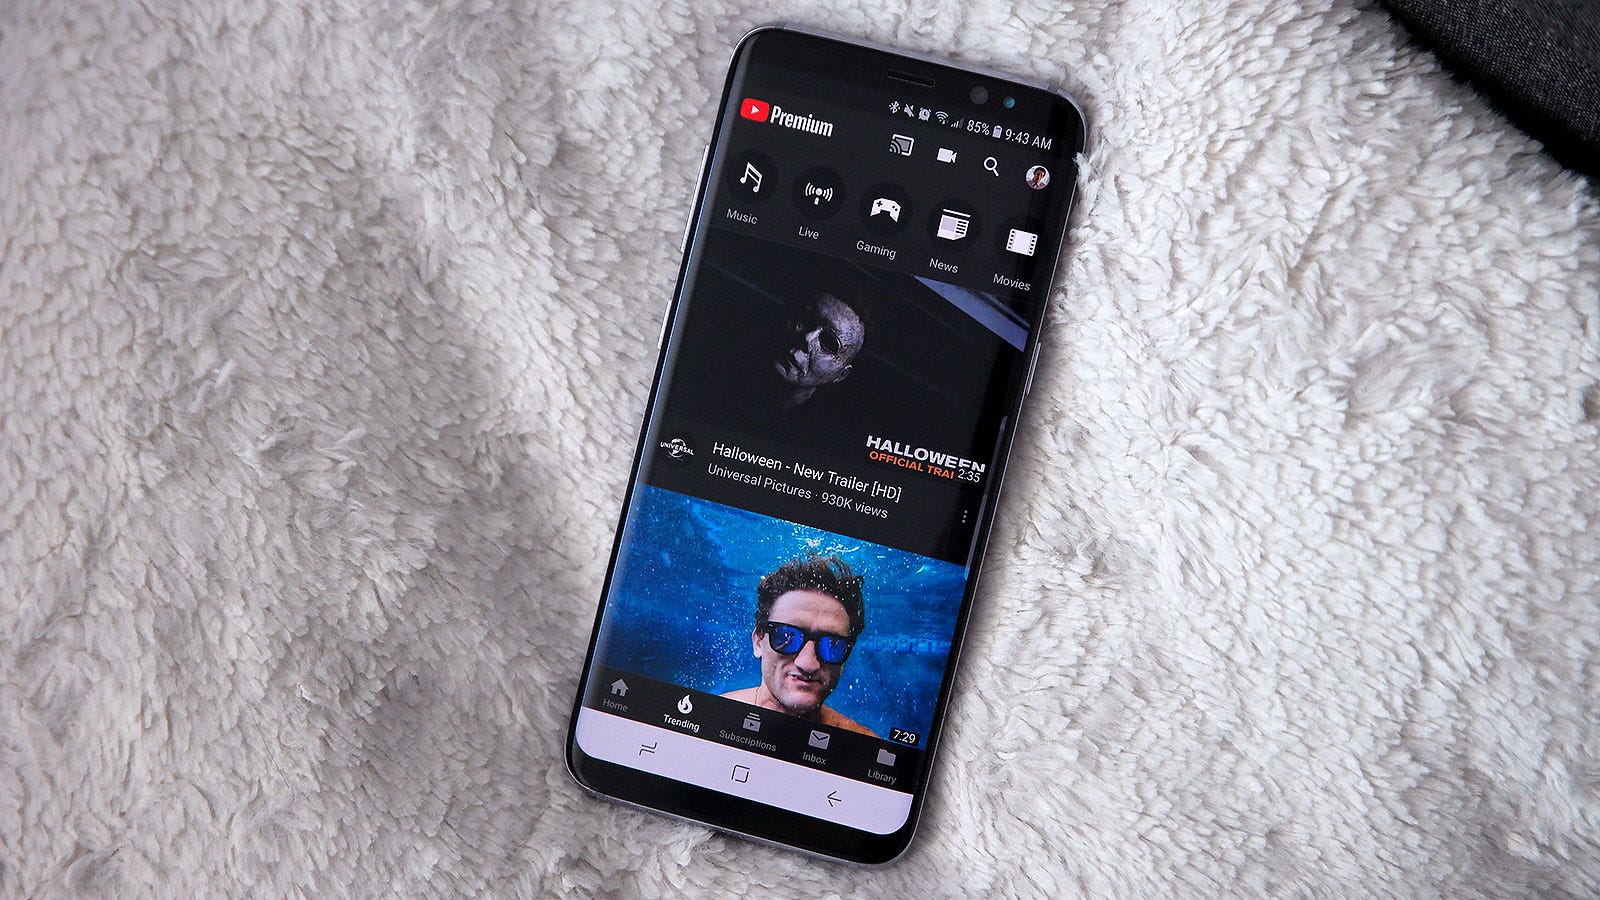 Youtube Studio App Picks Up Dark Topic Best Two Years After